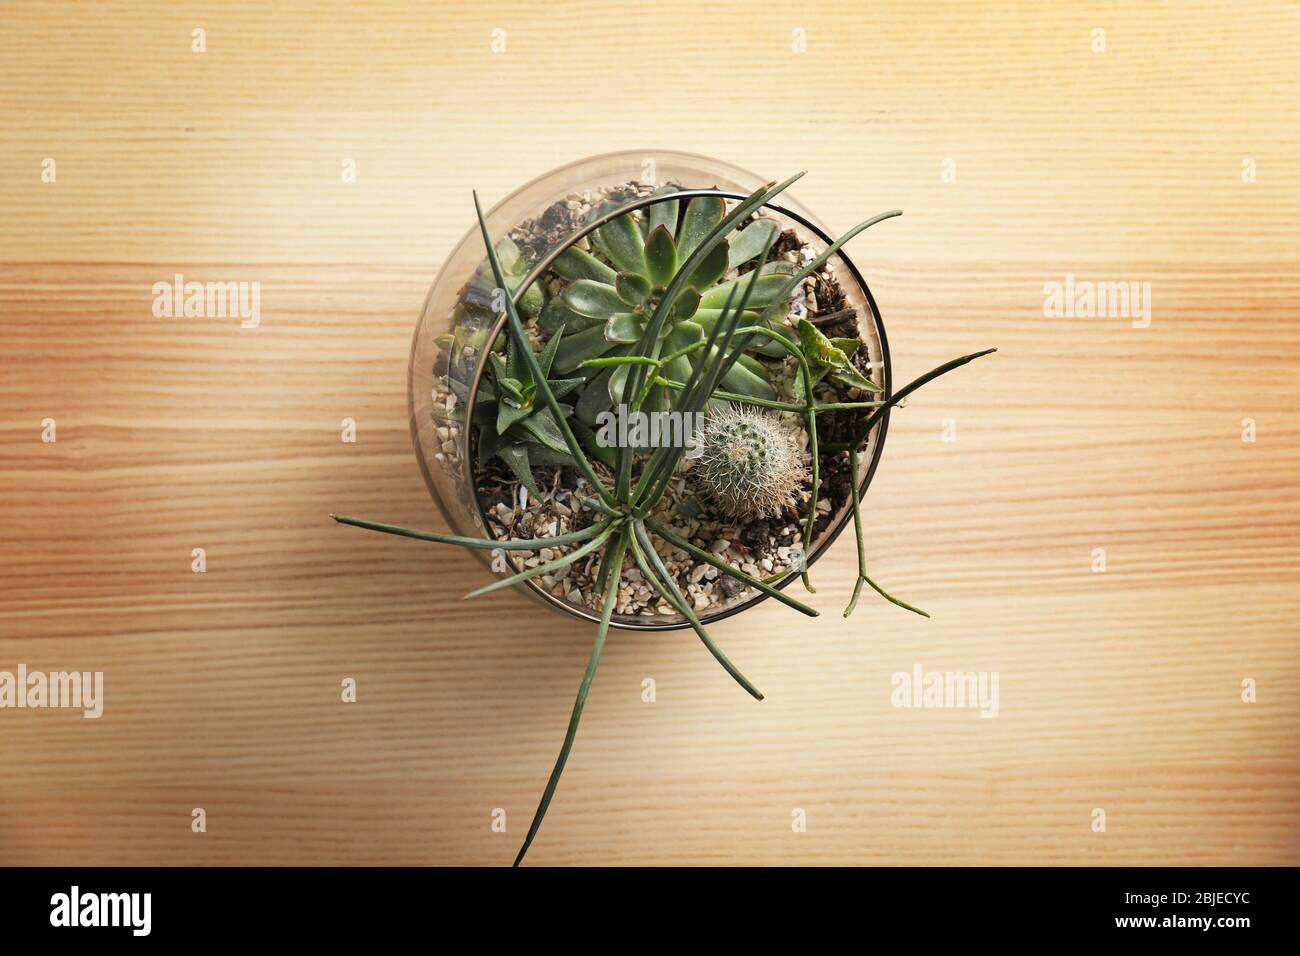 Florarium with succulents and cactus on wooden background Stock Photo